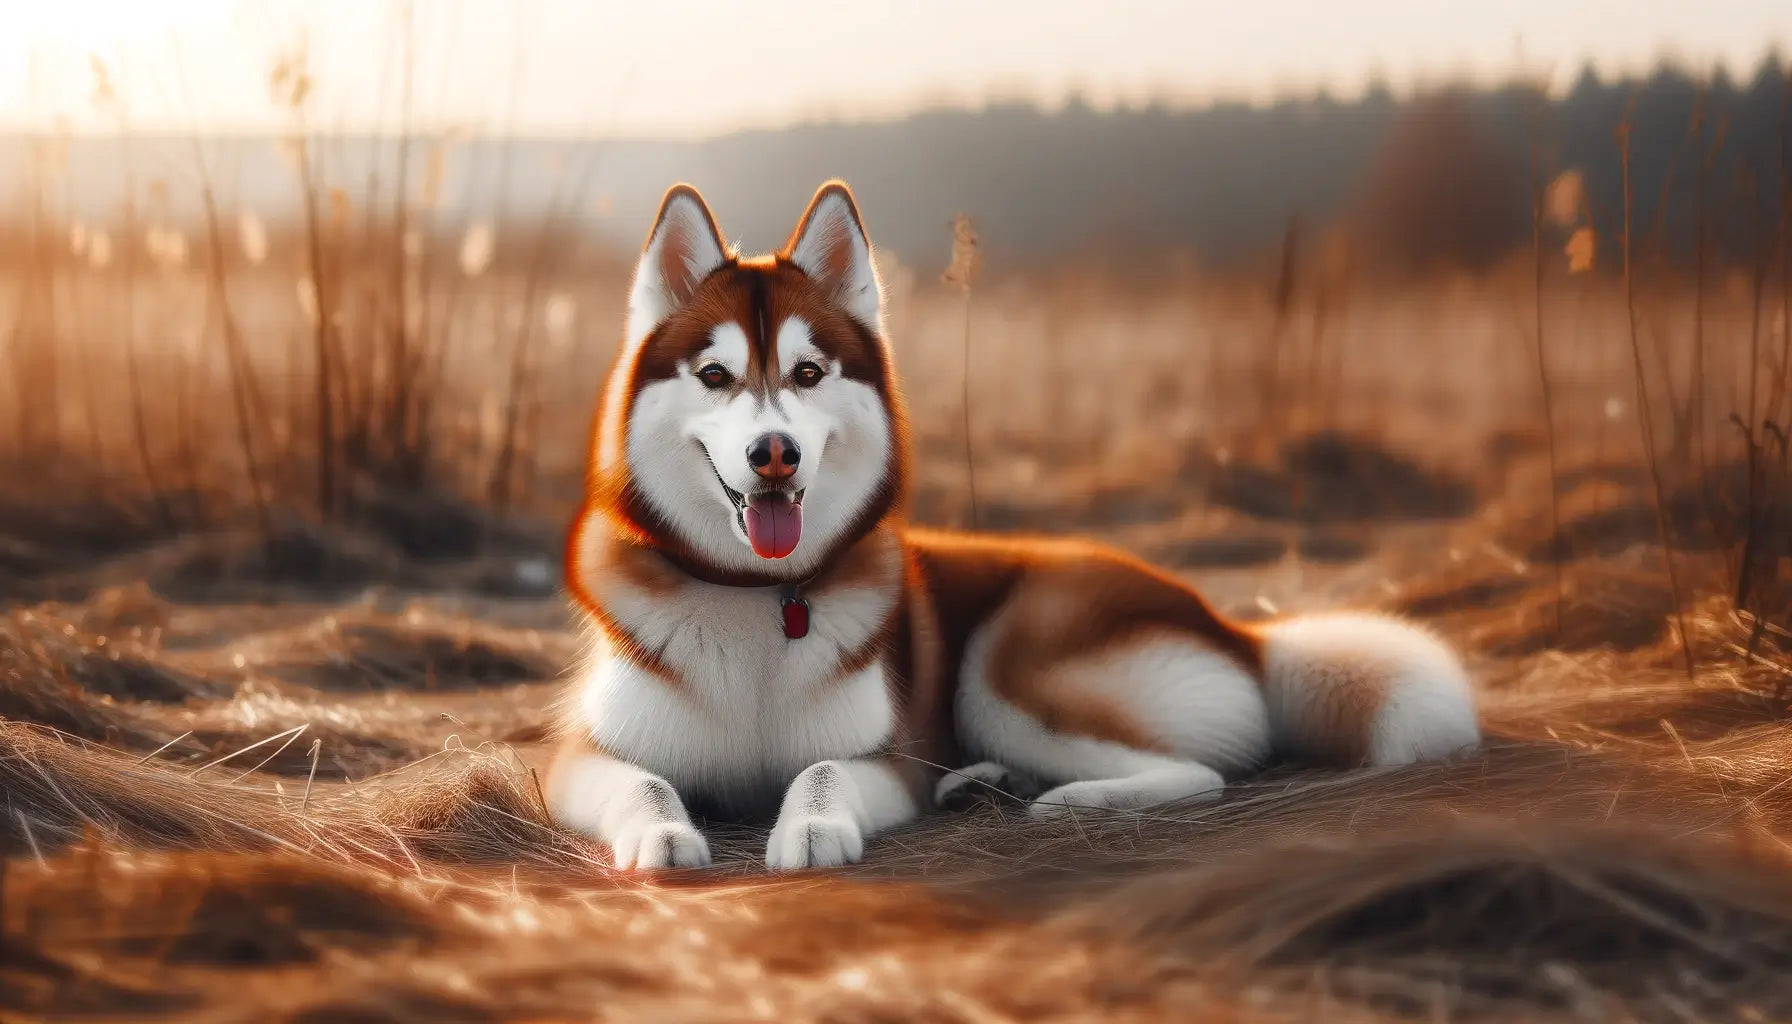 Image showing a content and relaxed Red Husky lying on dry grass.